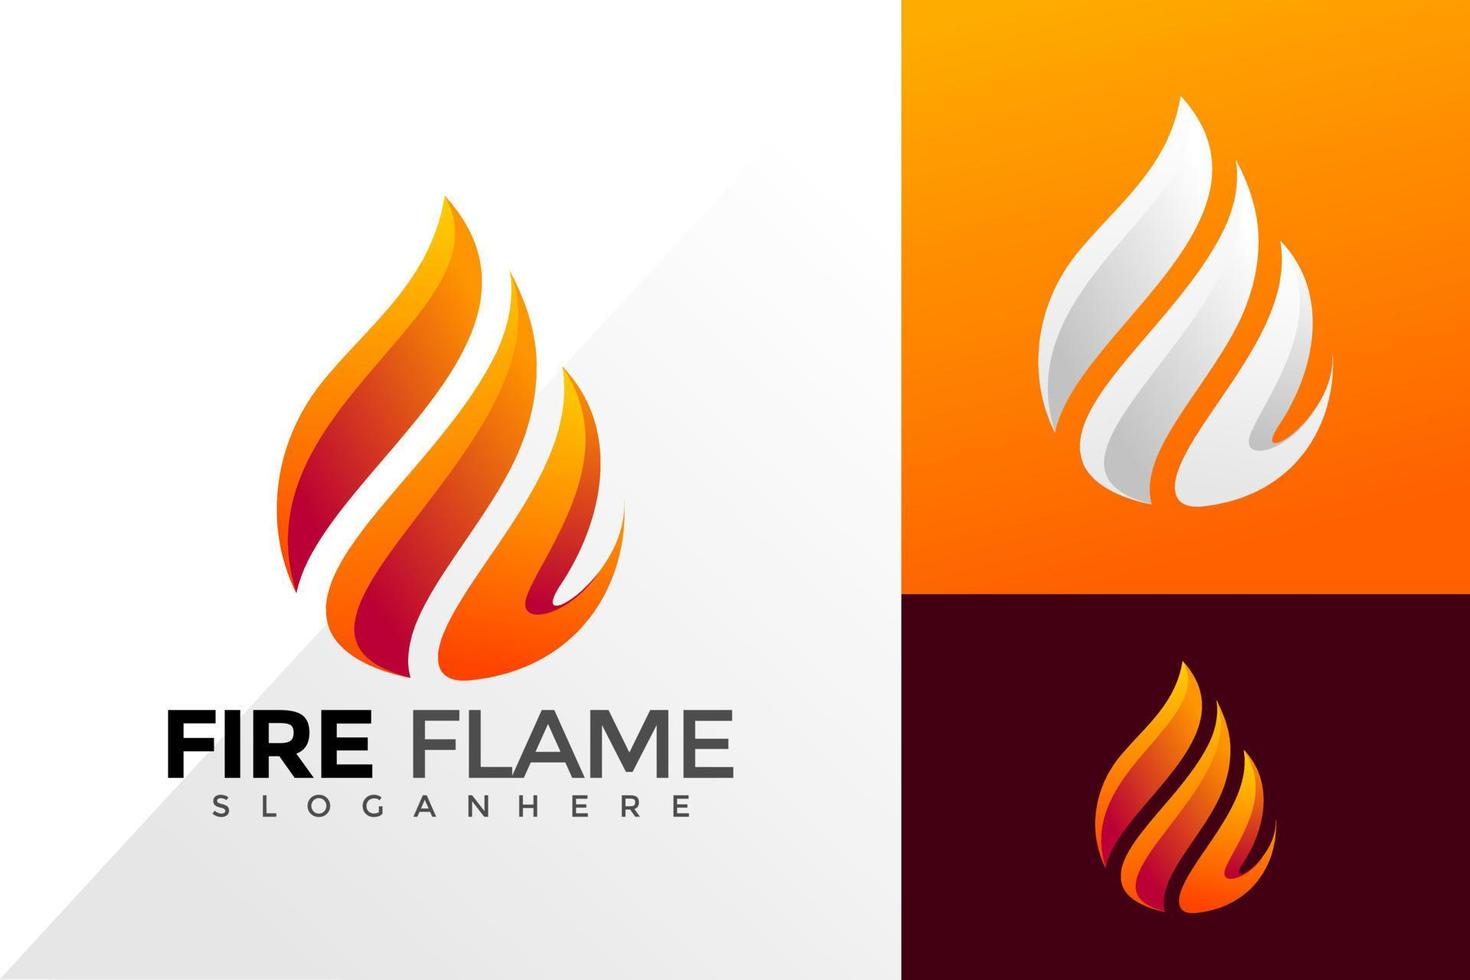 Fire flame logo design inspiration. Abstract emblem, designs concept, logos, logotype element for template vector